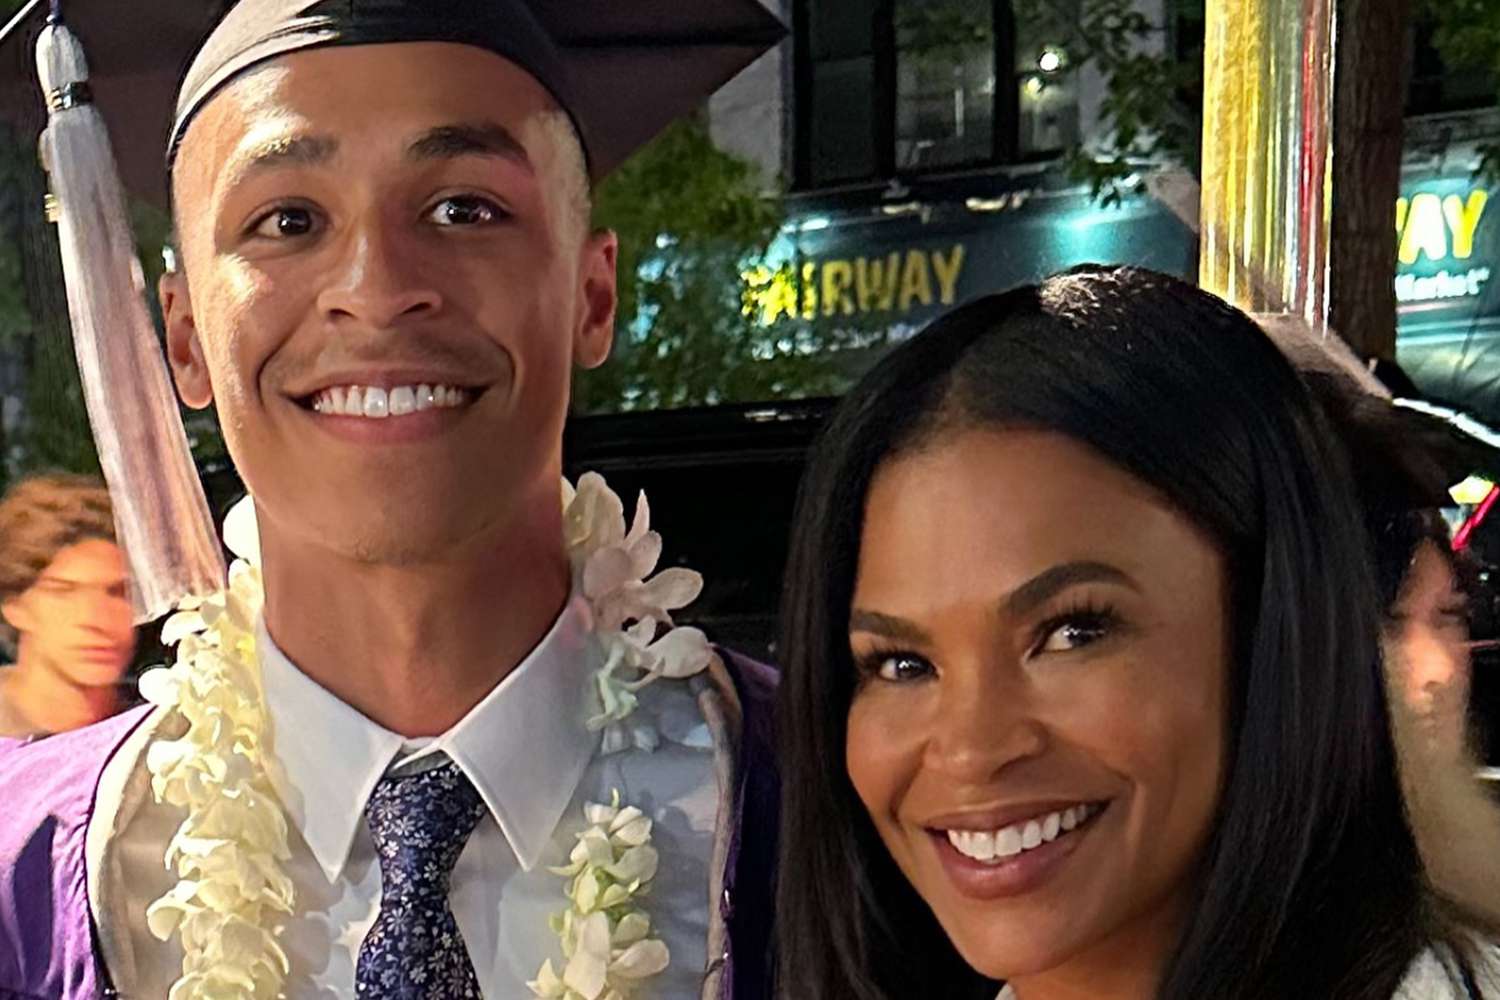 Nia Long Celebrates Her Son Massai, 23, as He Graduates from New York University: 'So Proud of You'